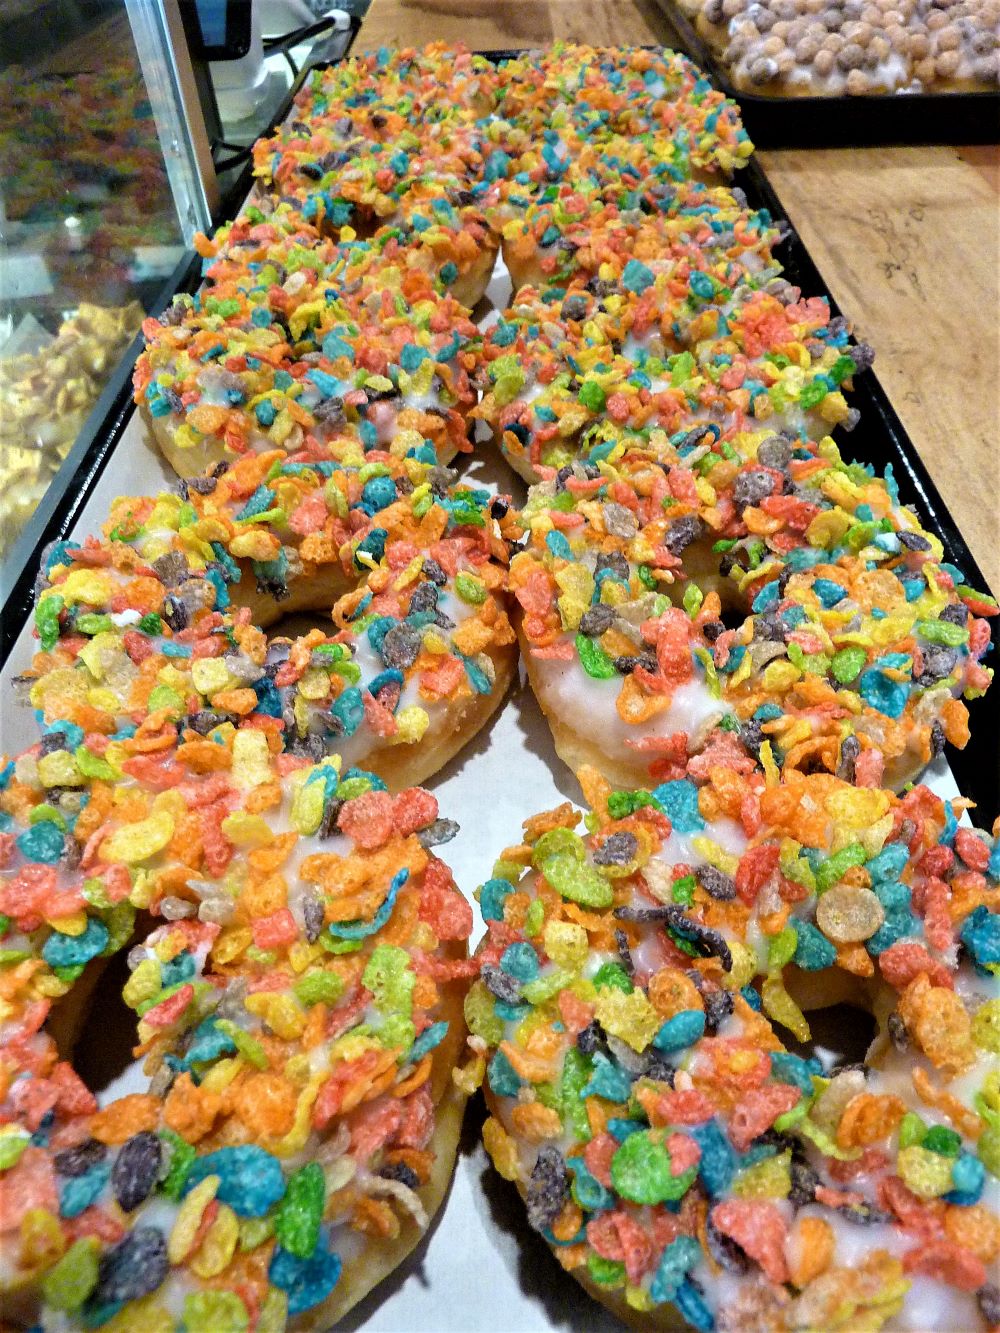 Fruity Pebbles doughnut from Country Kitchen Donuts in Millis, MA.